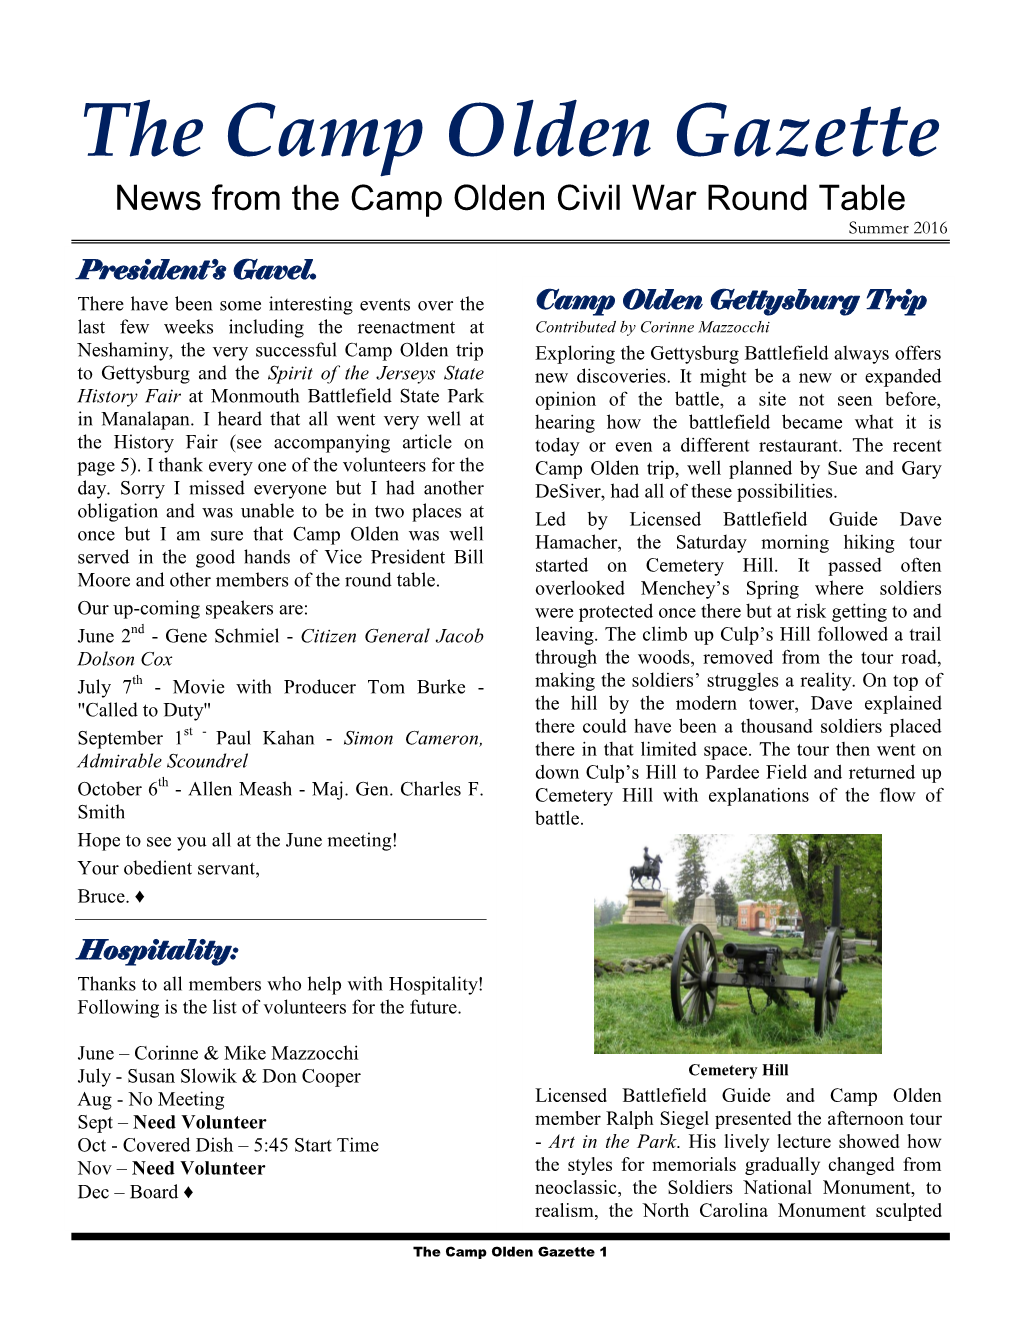 The Camp Olden Gazette News from the Camp Olden Civil War Round Table Summer 2016